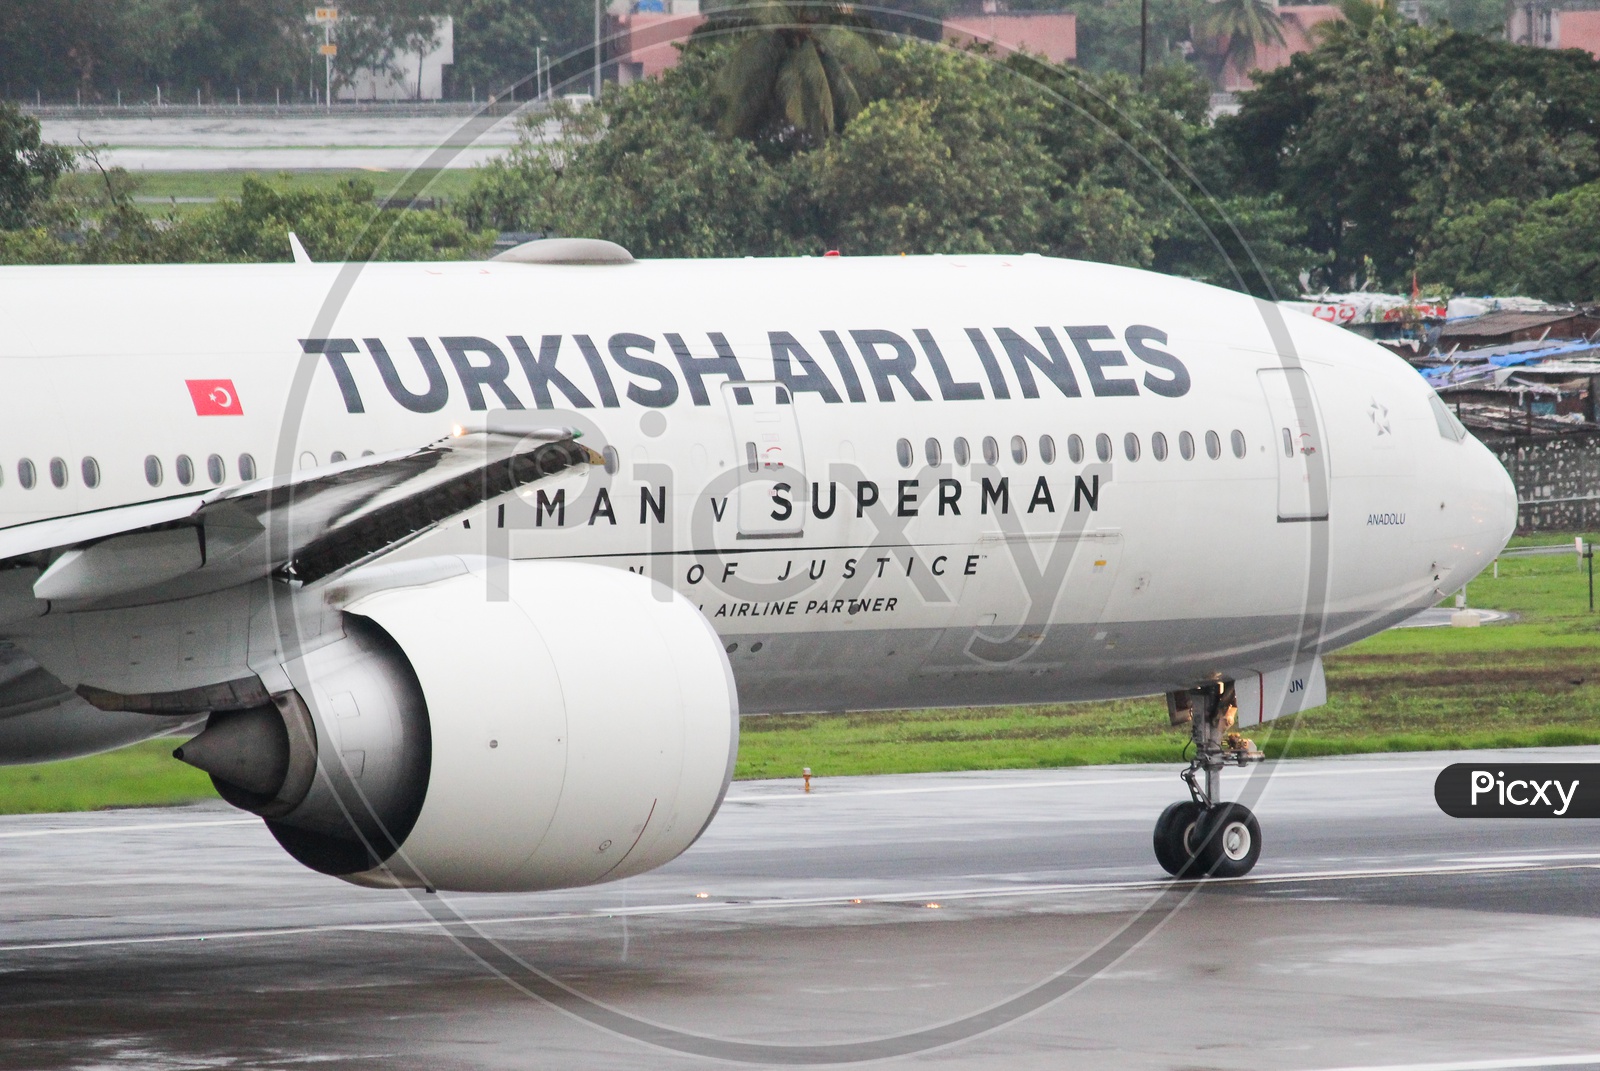 Up close with Turkish airlines B777-300ER in Batman vs superman livery